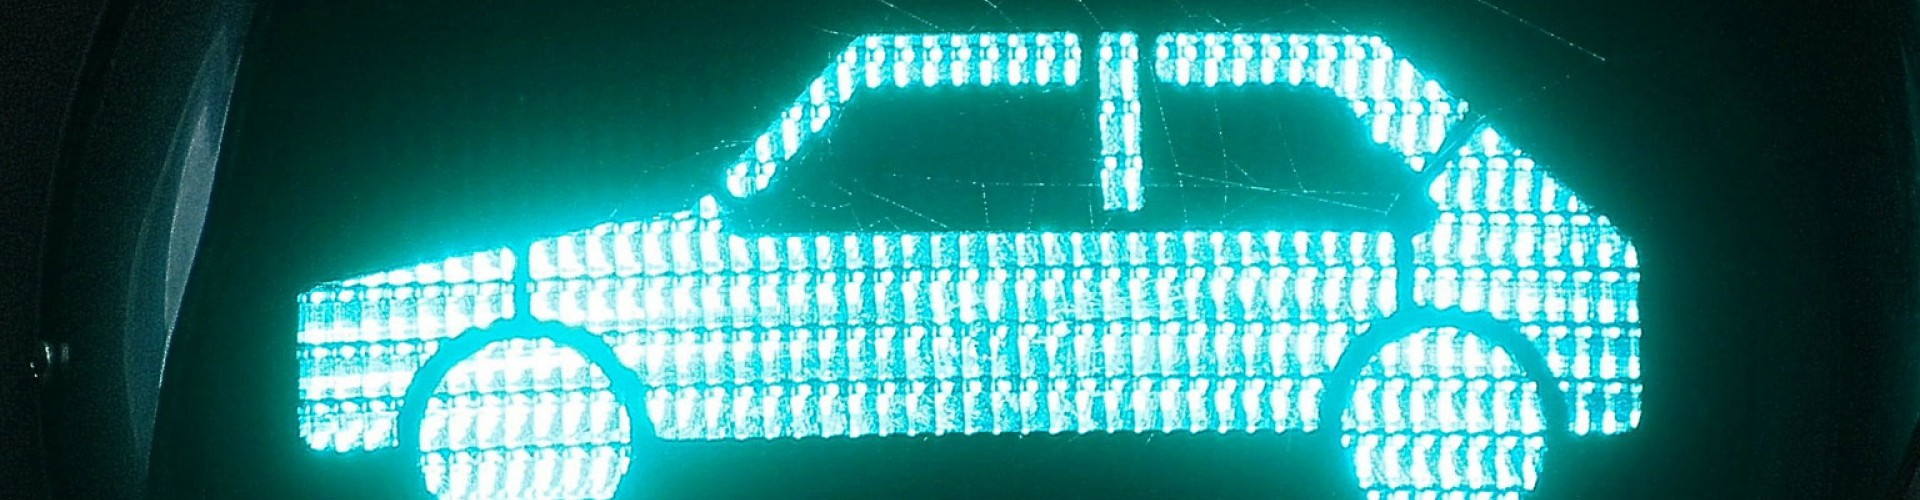 car icon light up in green light